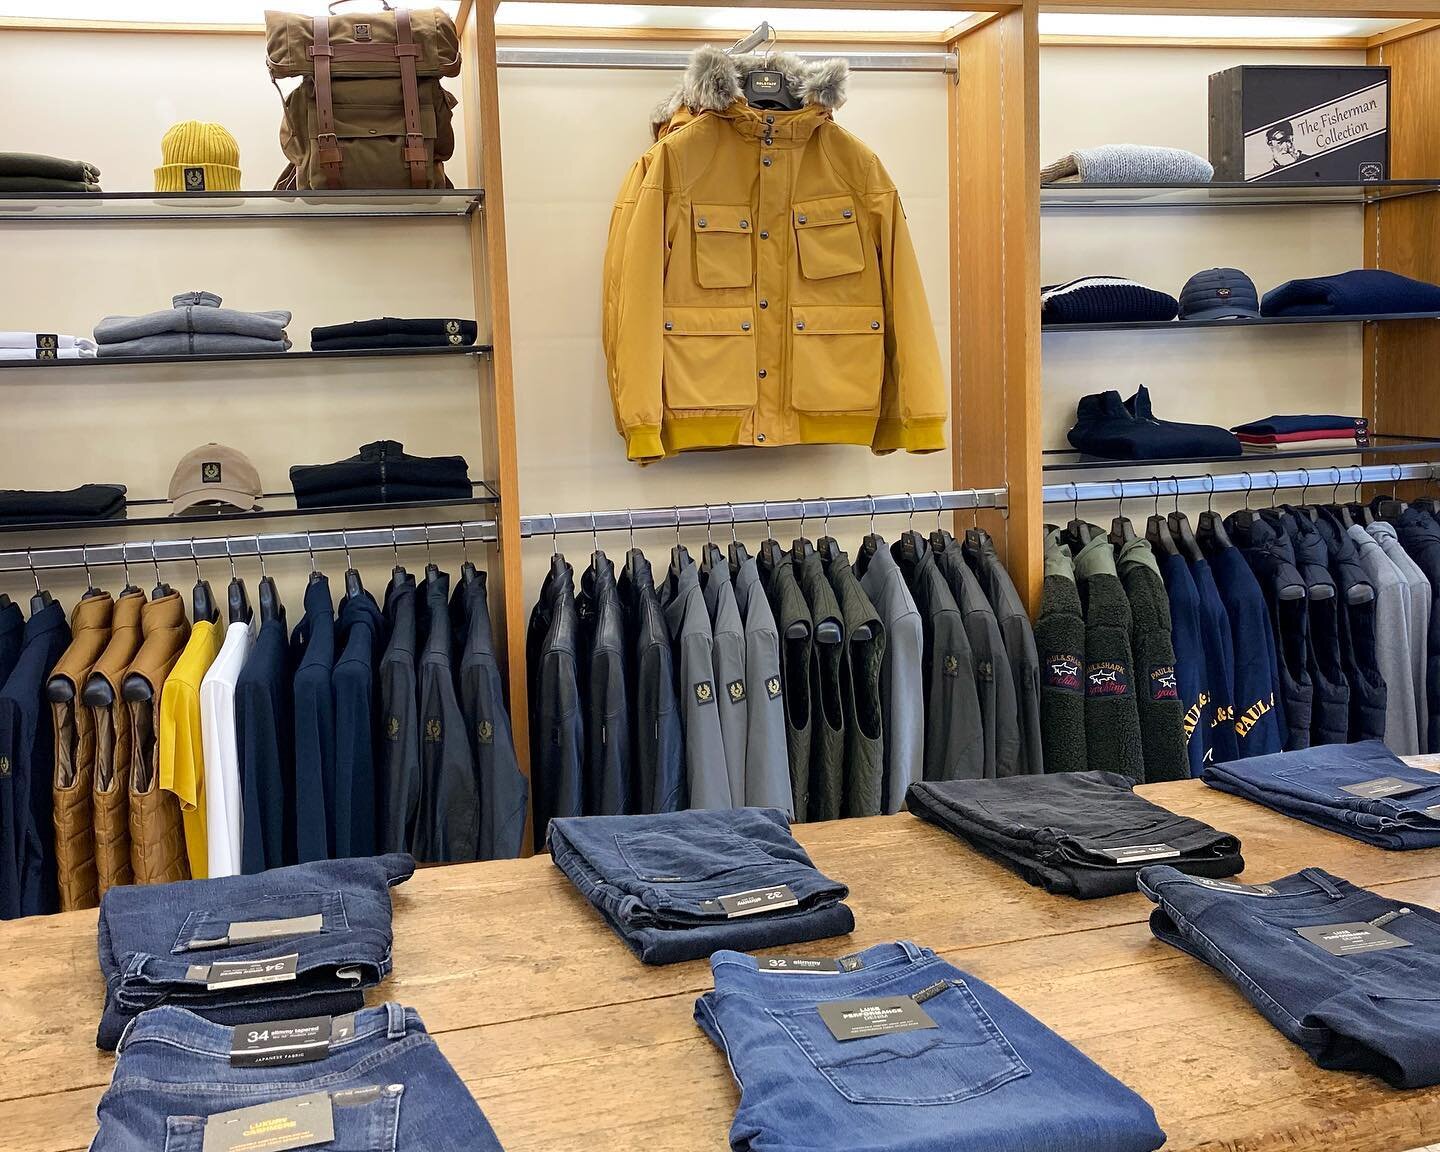 Good morning Saturday! We&rsquo;re open 10am - 5.30pm. 
Everyone keeps saying how great the store looks at the moment. Come and say hi 👋

#tedwilliamsmenswear #mensfashion #suttoncoldfieldbusiness #suttoncoldfieldwedding #autumnwinter2021 #clothings